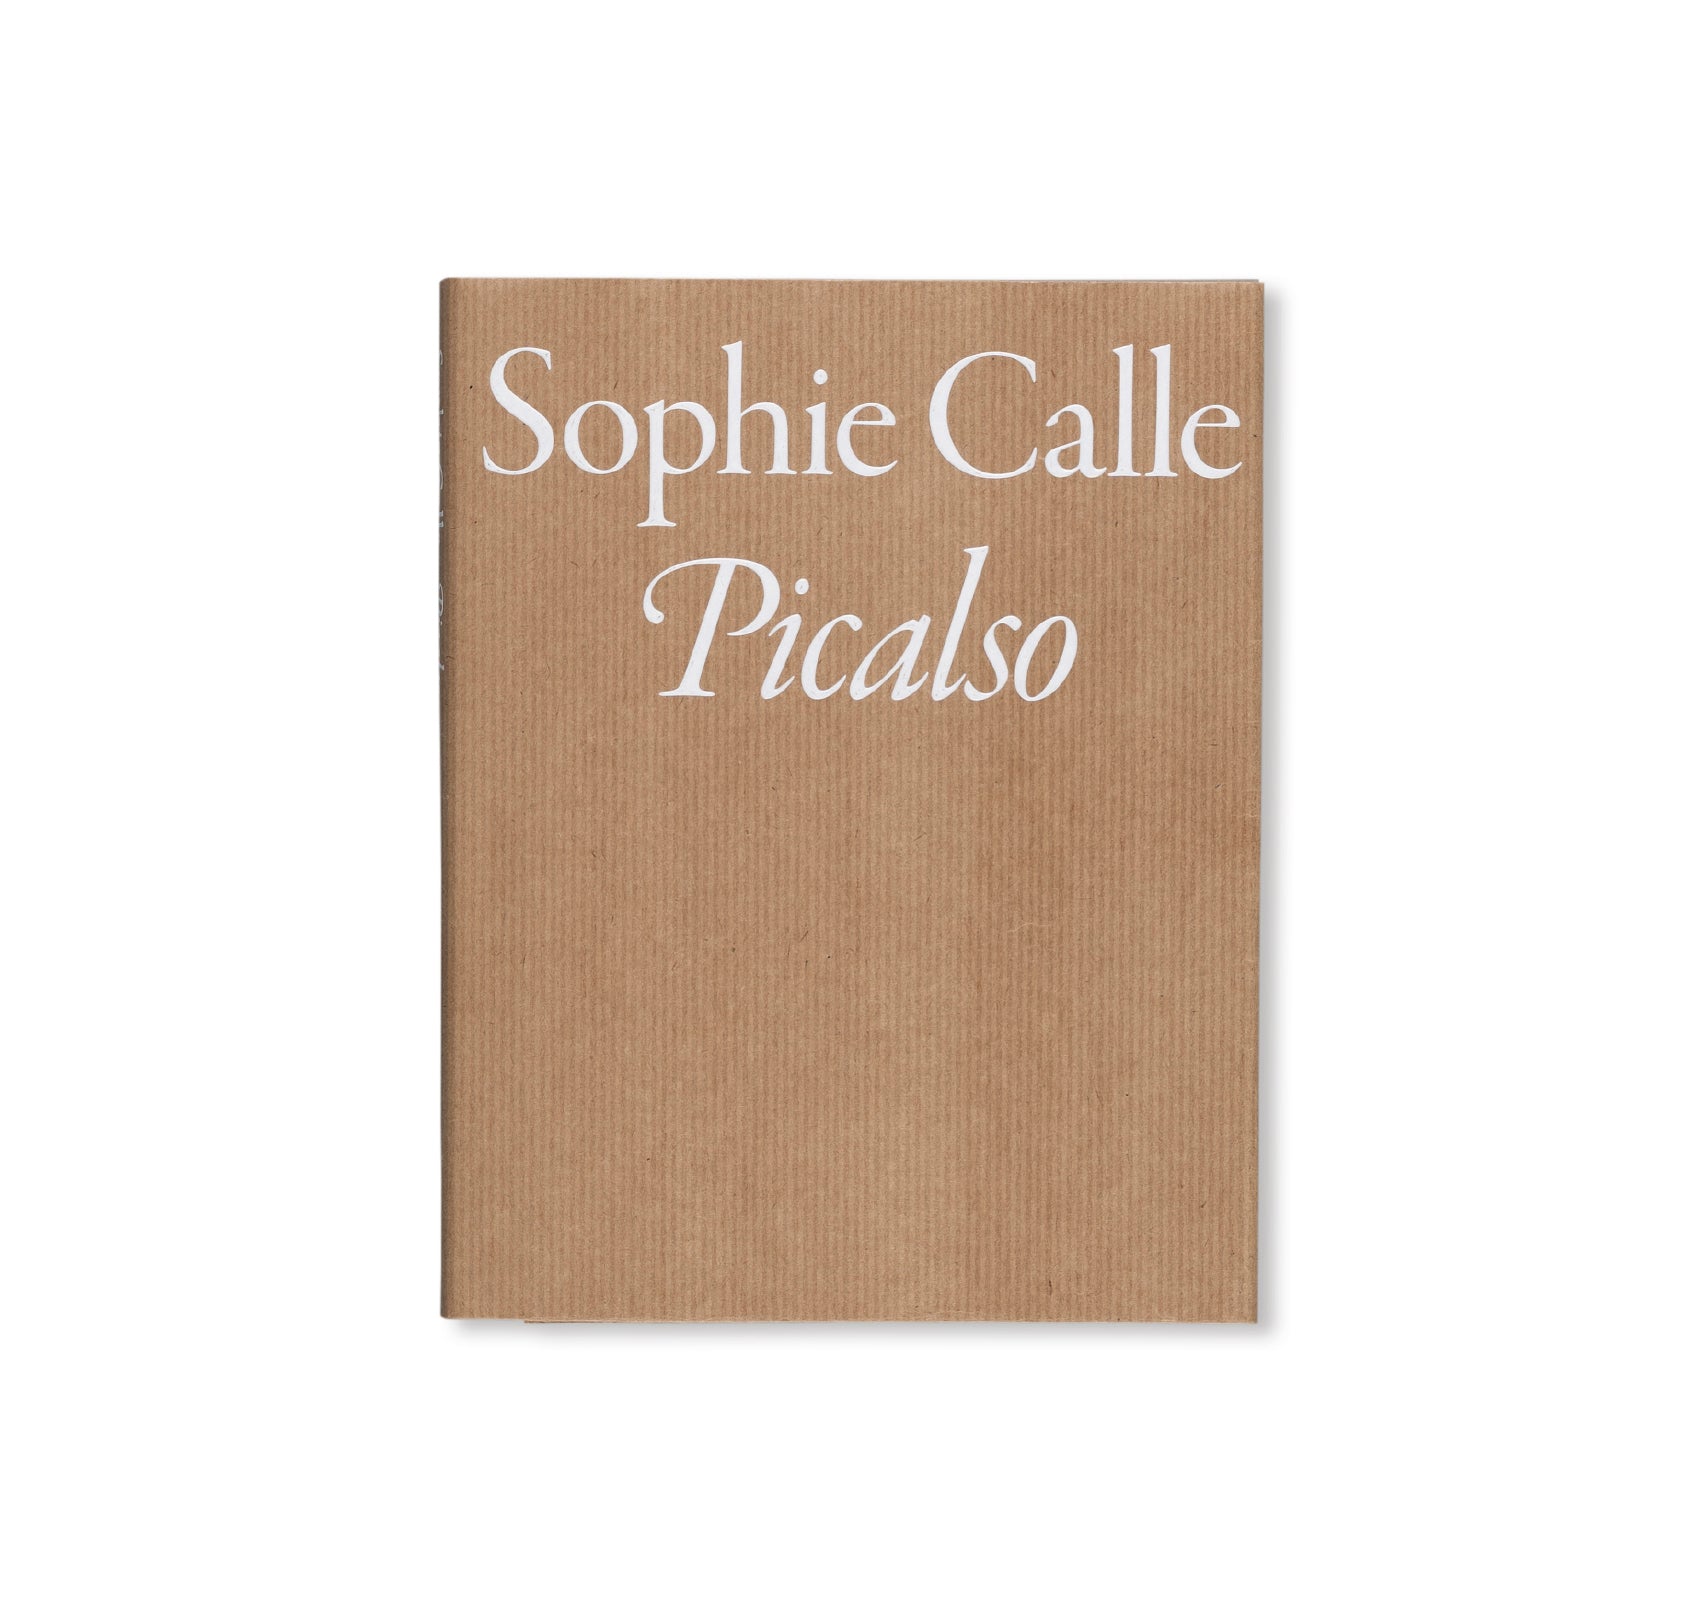 PICALSO by Sophie Calle